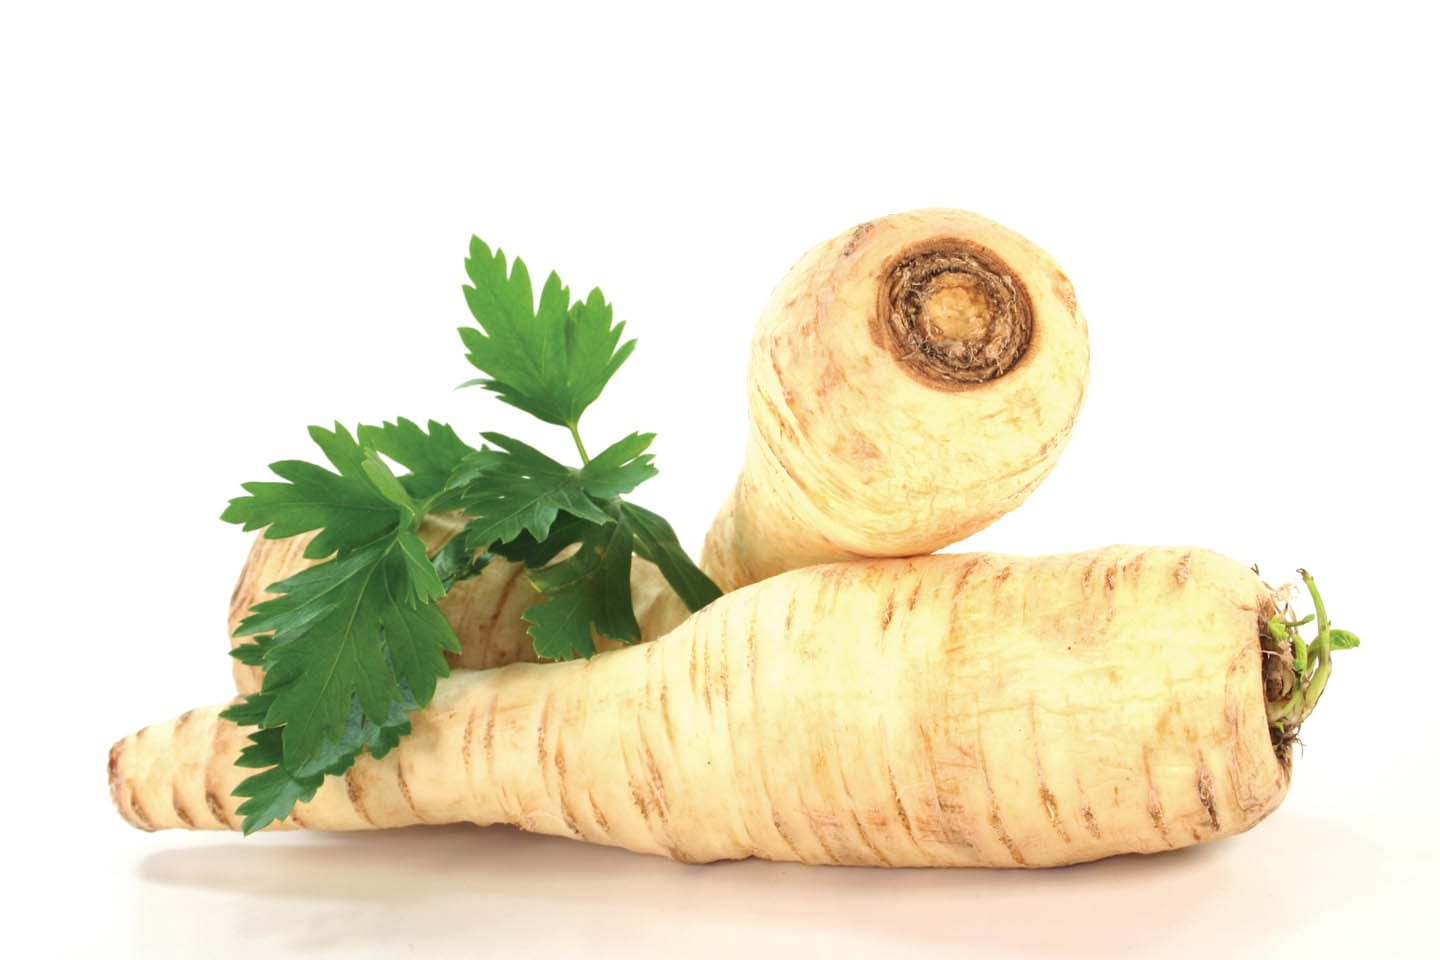 parsnips and parsely in chattanooga